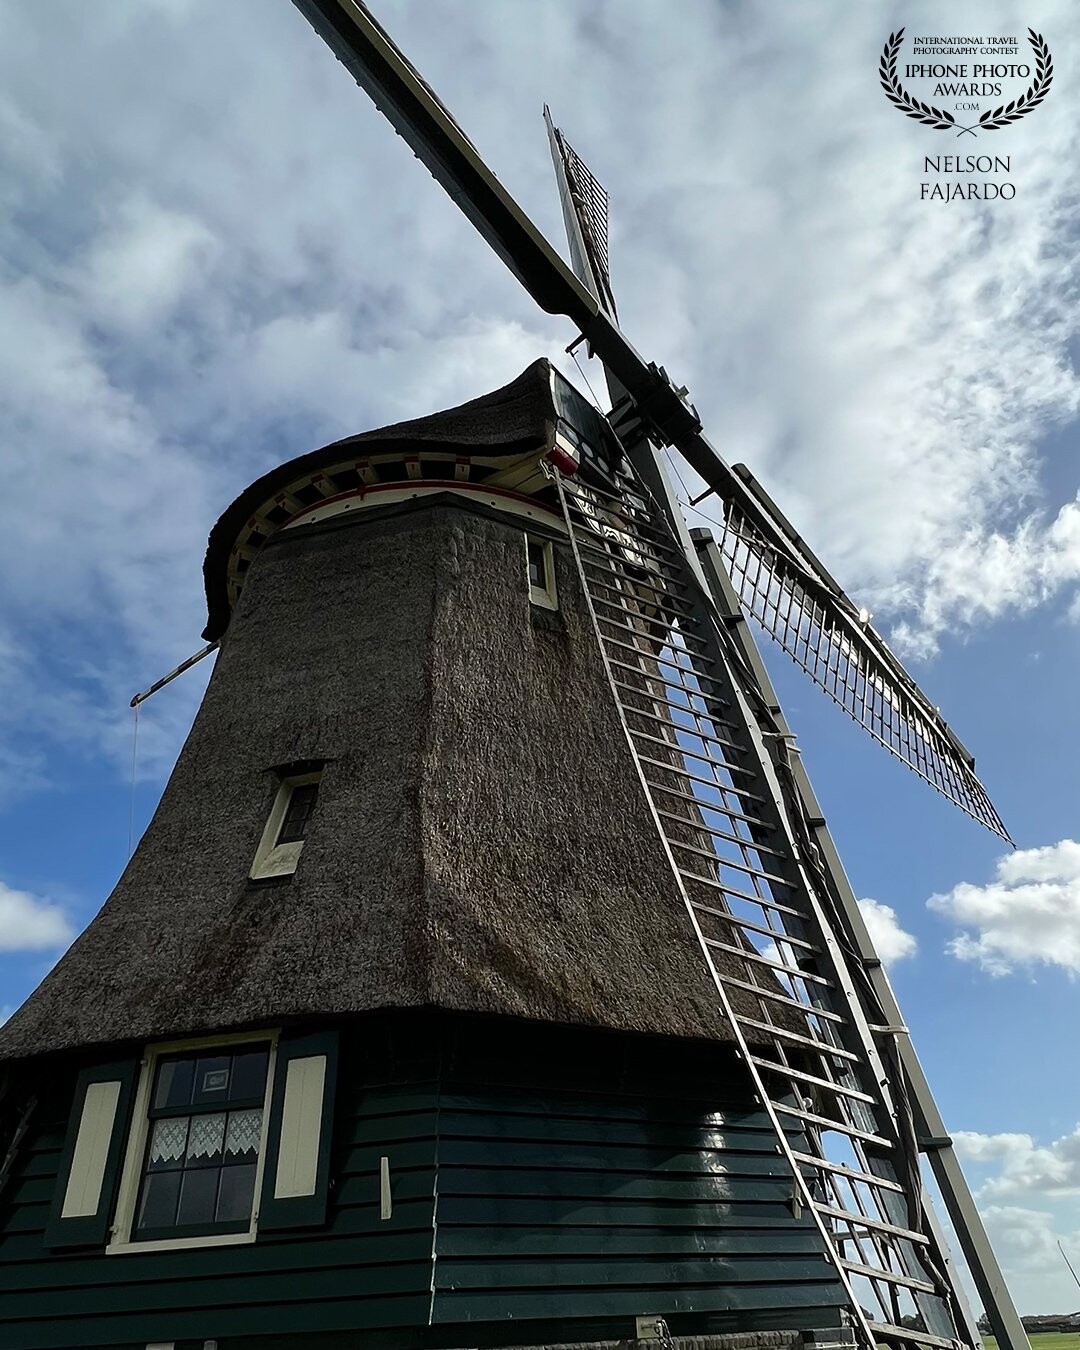 I guess, I don’t have to describe this. It’s Hollands famous windmill, taken on a very strange scattered rain showers, like every 5-10 minutes.